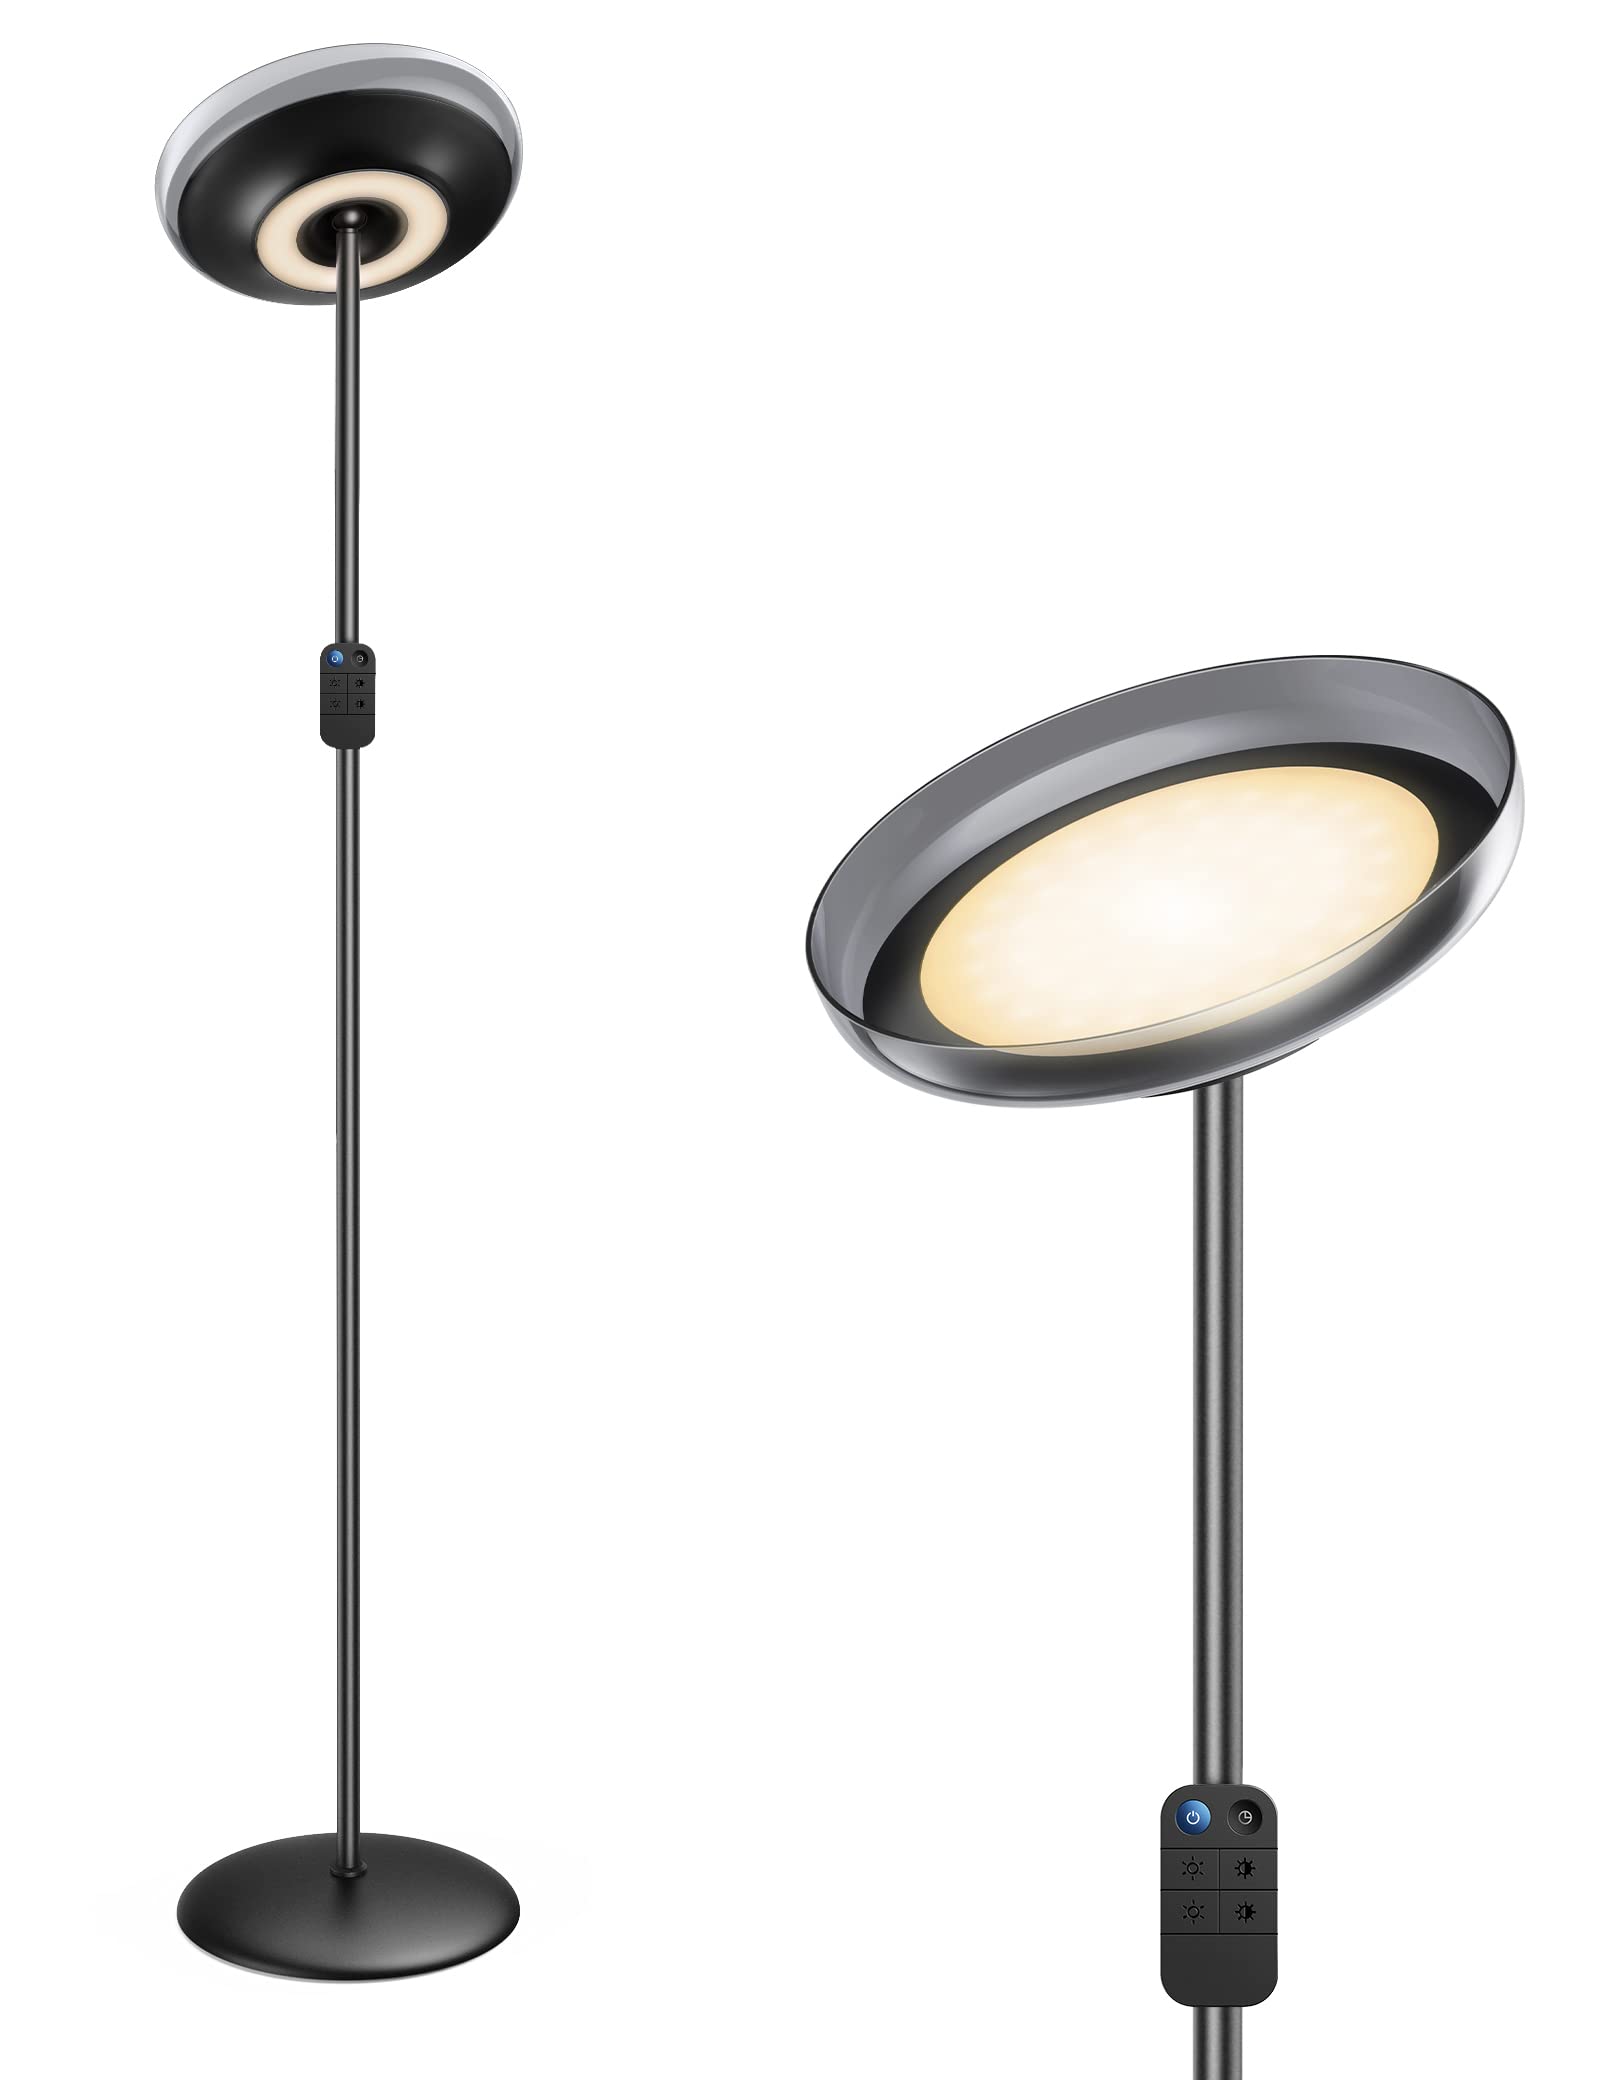 LED Floor Lamp, 2-in-1 Modern Torchiere Floor Light with 16 Lighting Settings, Rotate Head and Extendable Height,Energy Saving Memory Function Time...